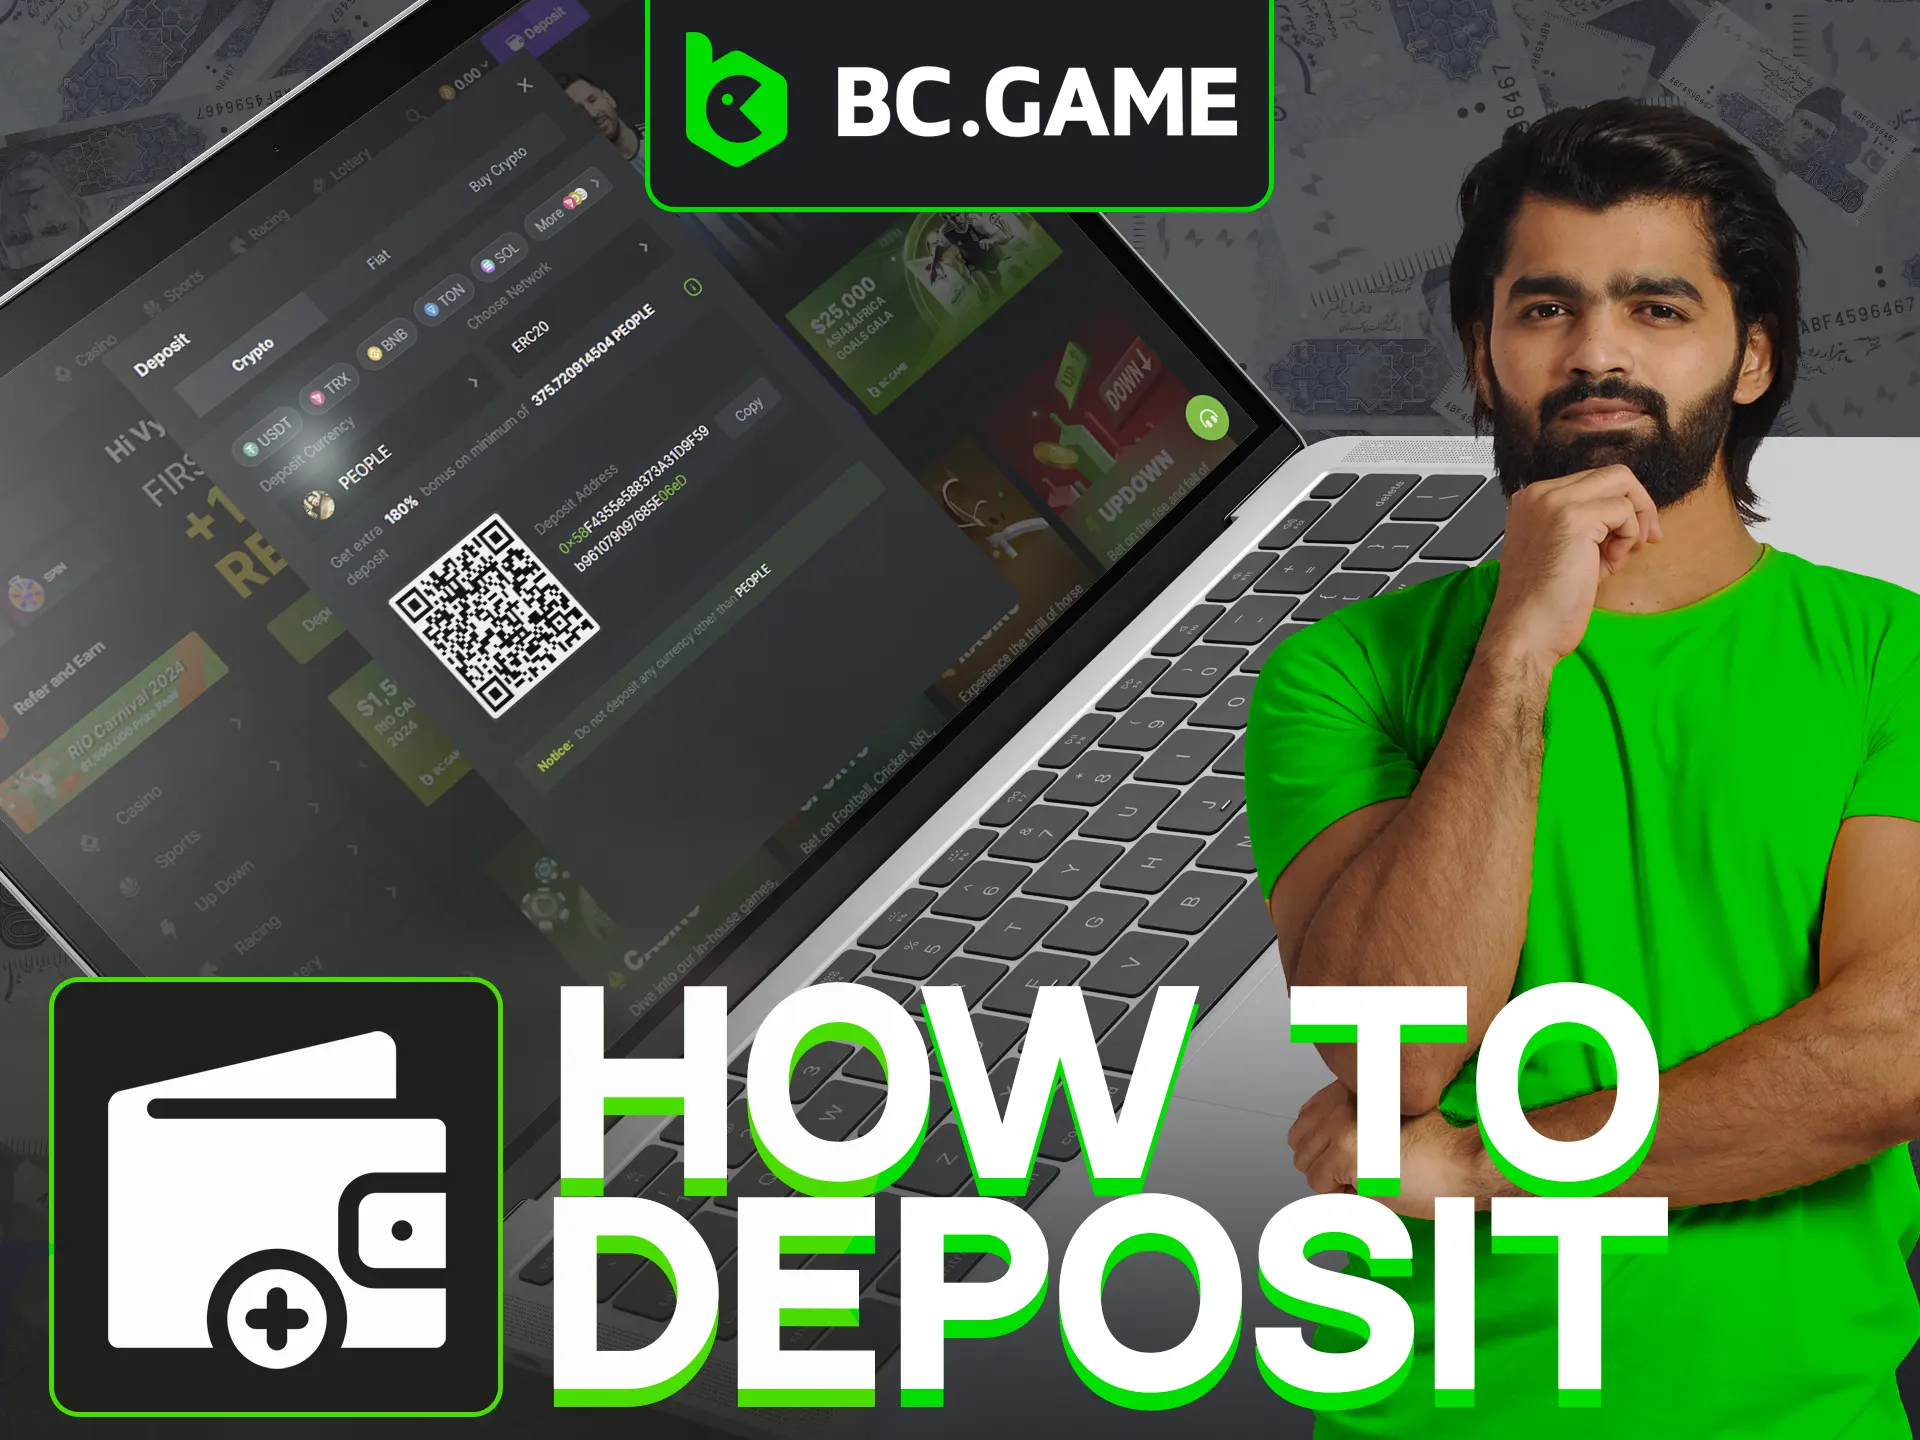 To deposit on BC Game, log in, choose payment method, type the amount.